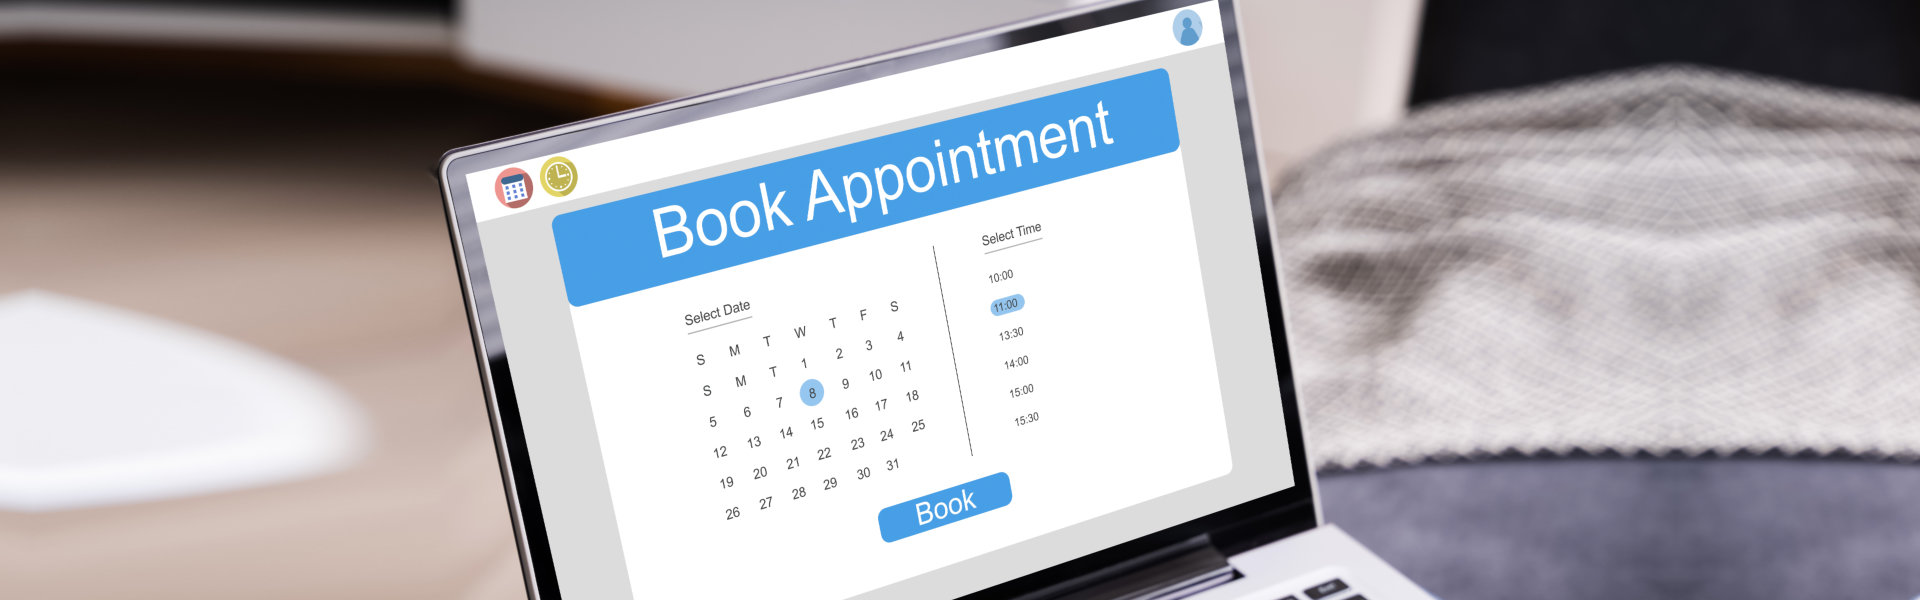 Book Appointment on laptop screen